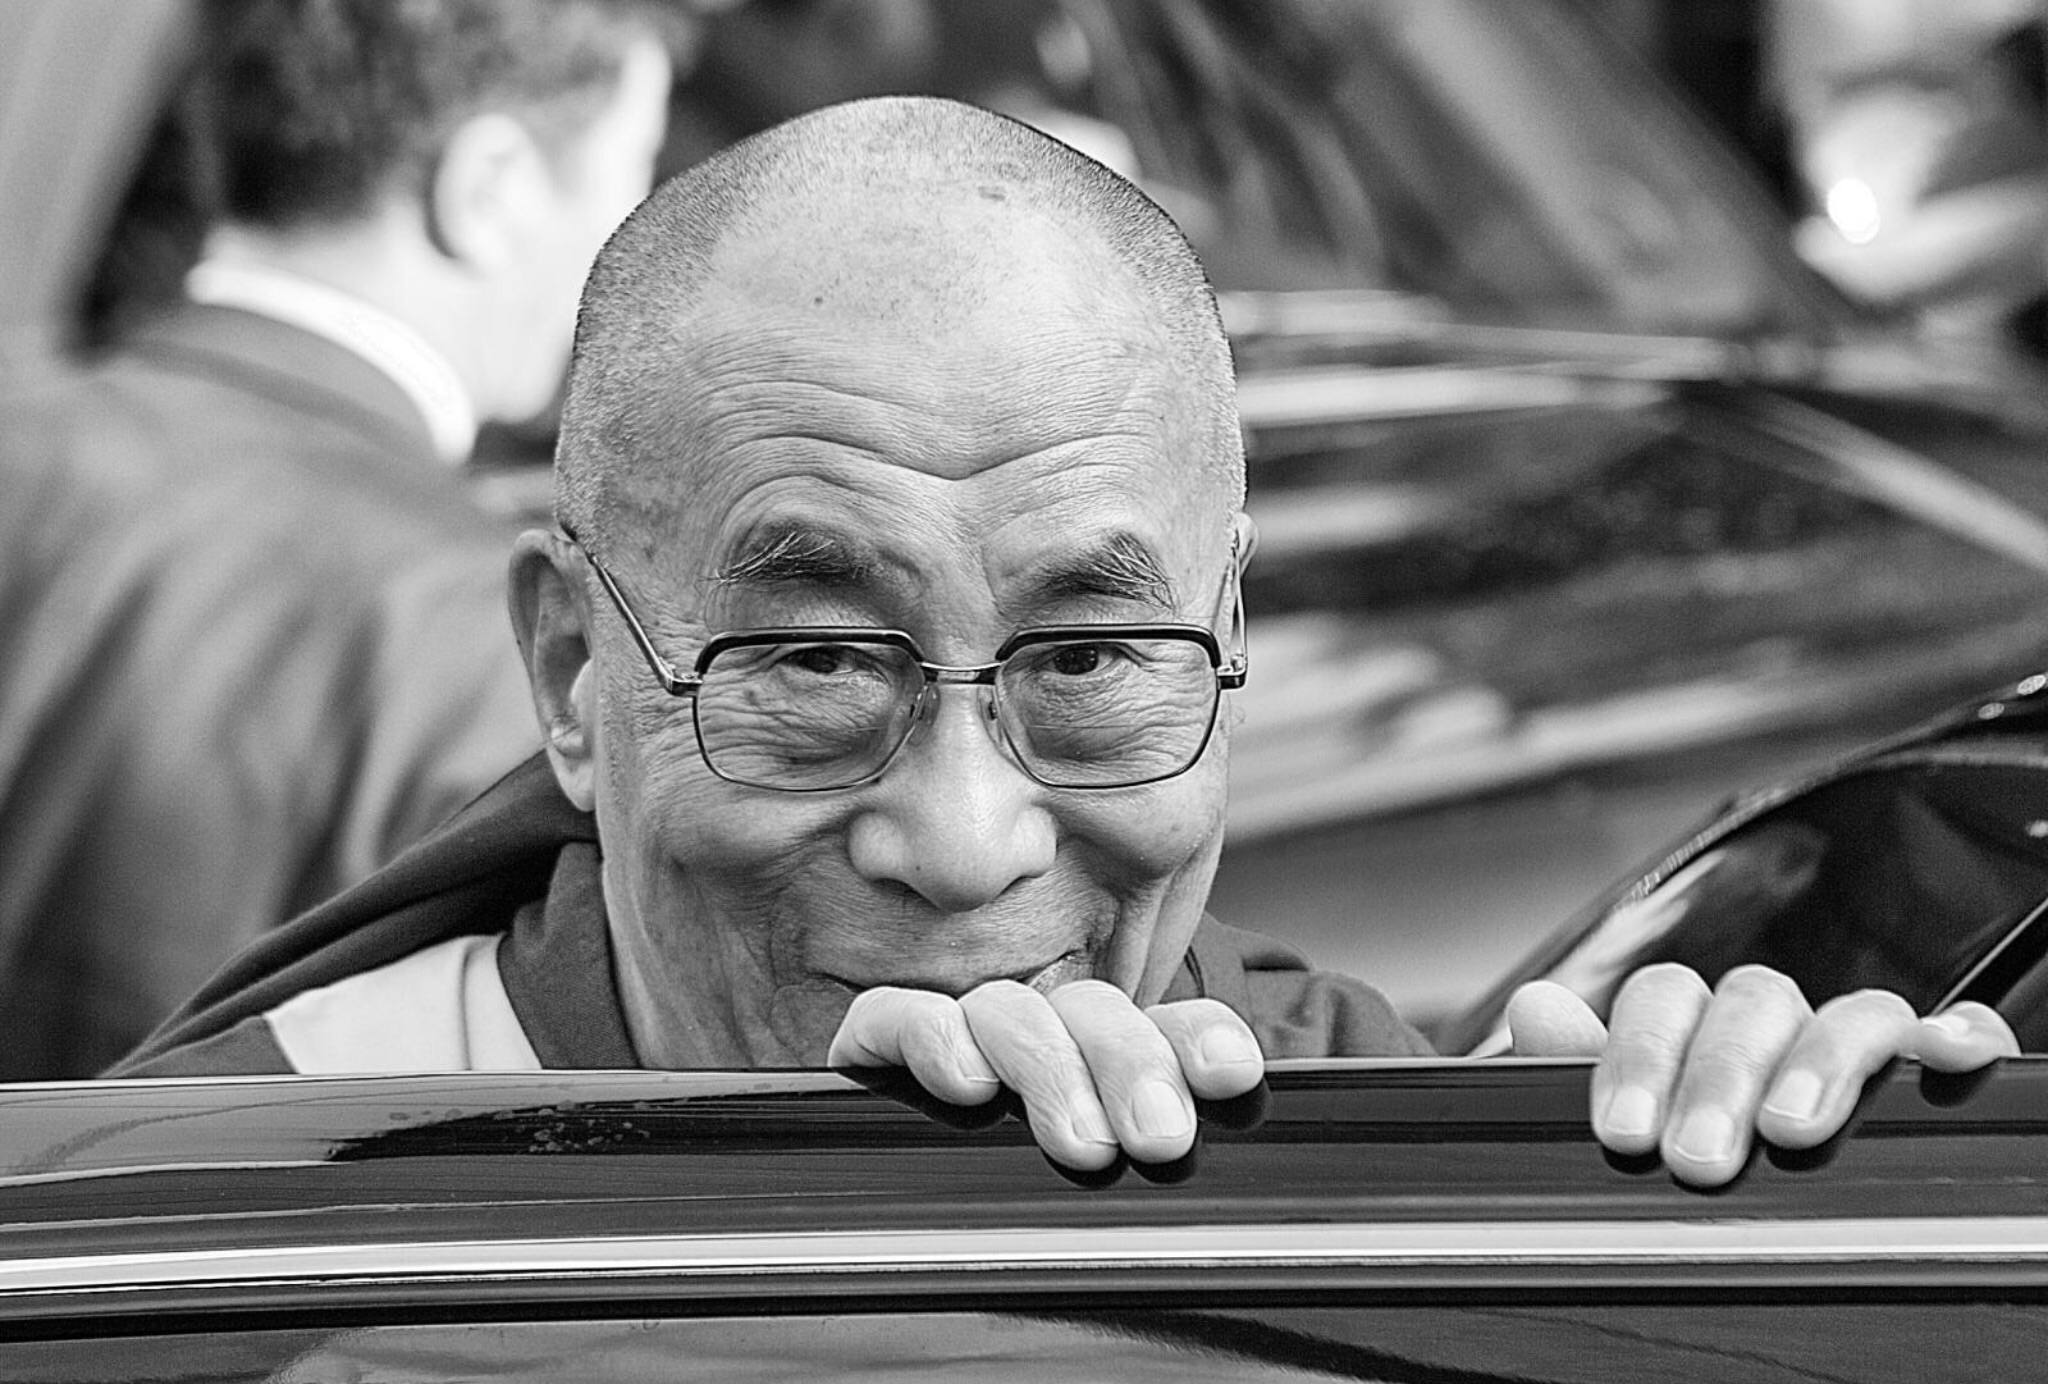 Inspirational Quotes About Happiness From Dalai Lama